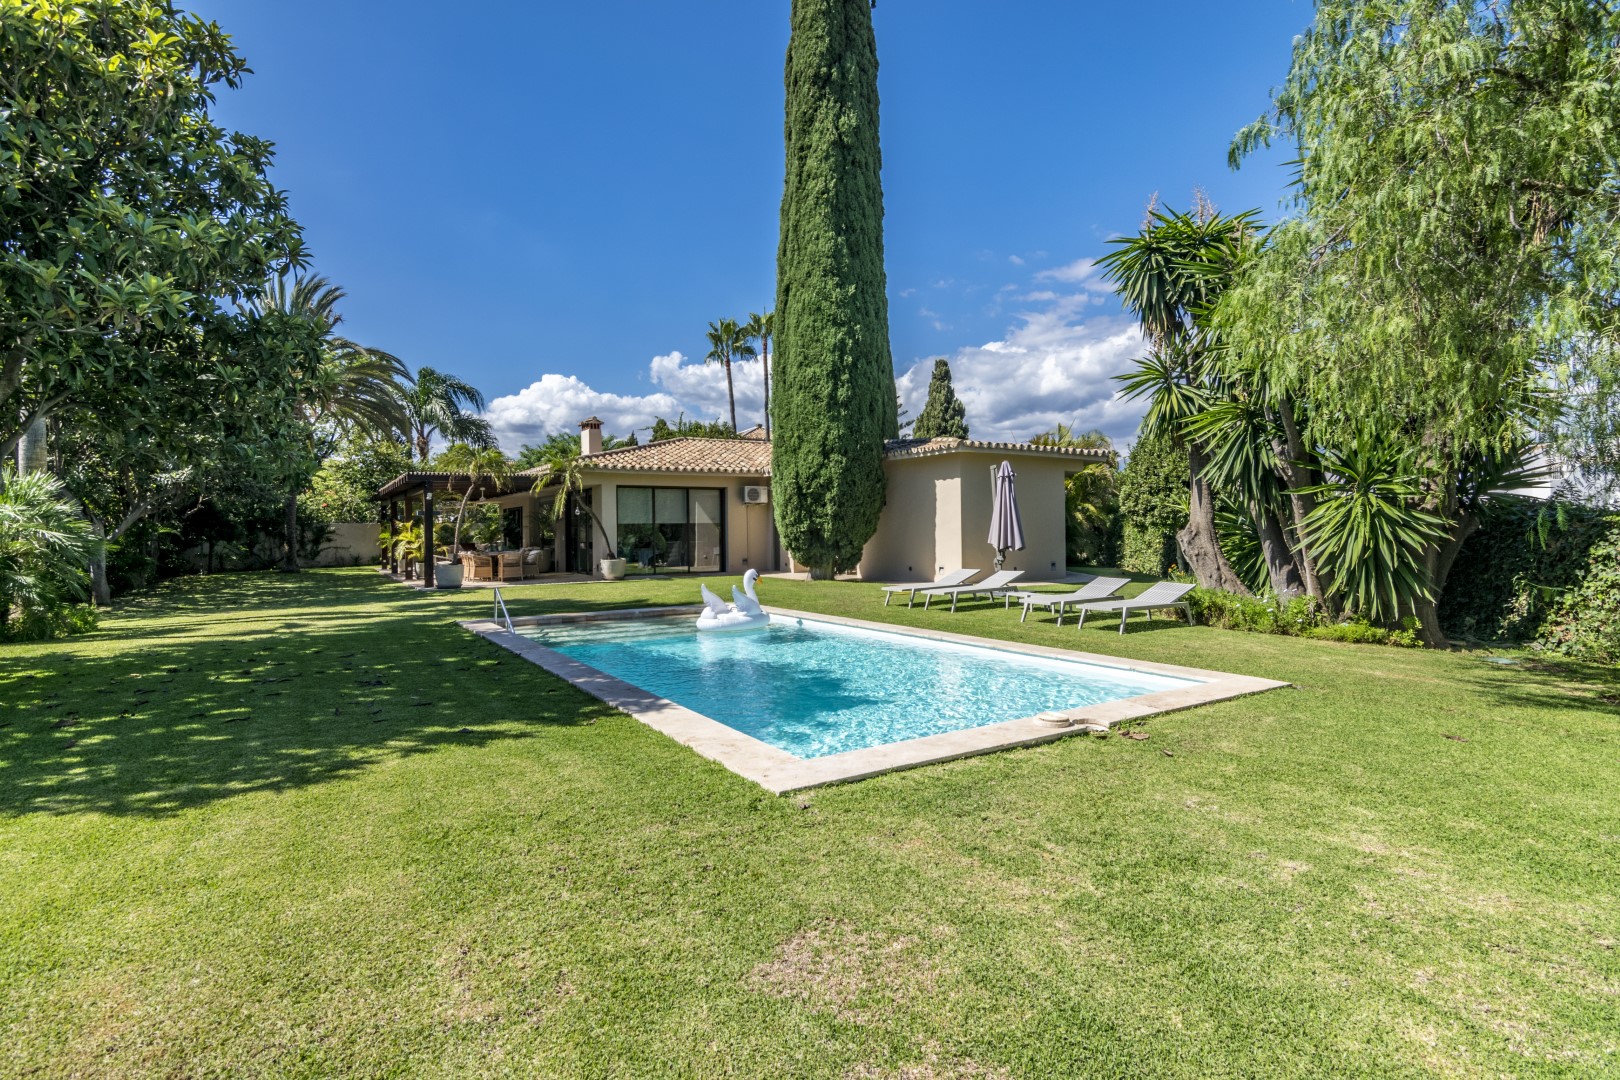 Property Image 1 - Villa with spacious garden and walking distance to amenities